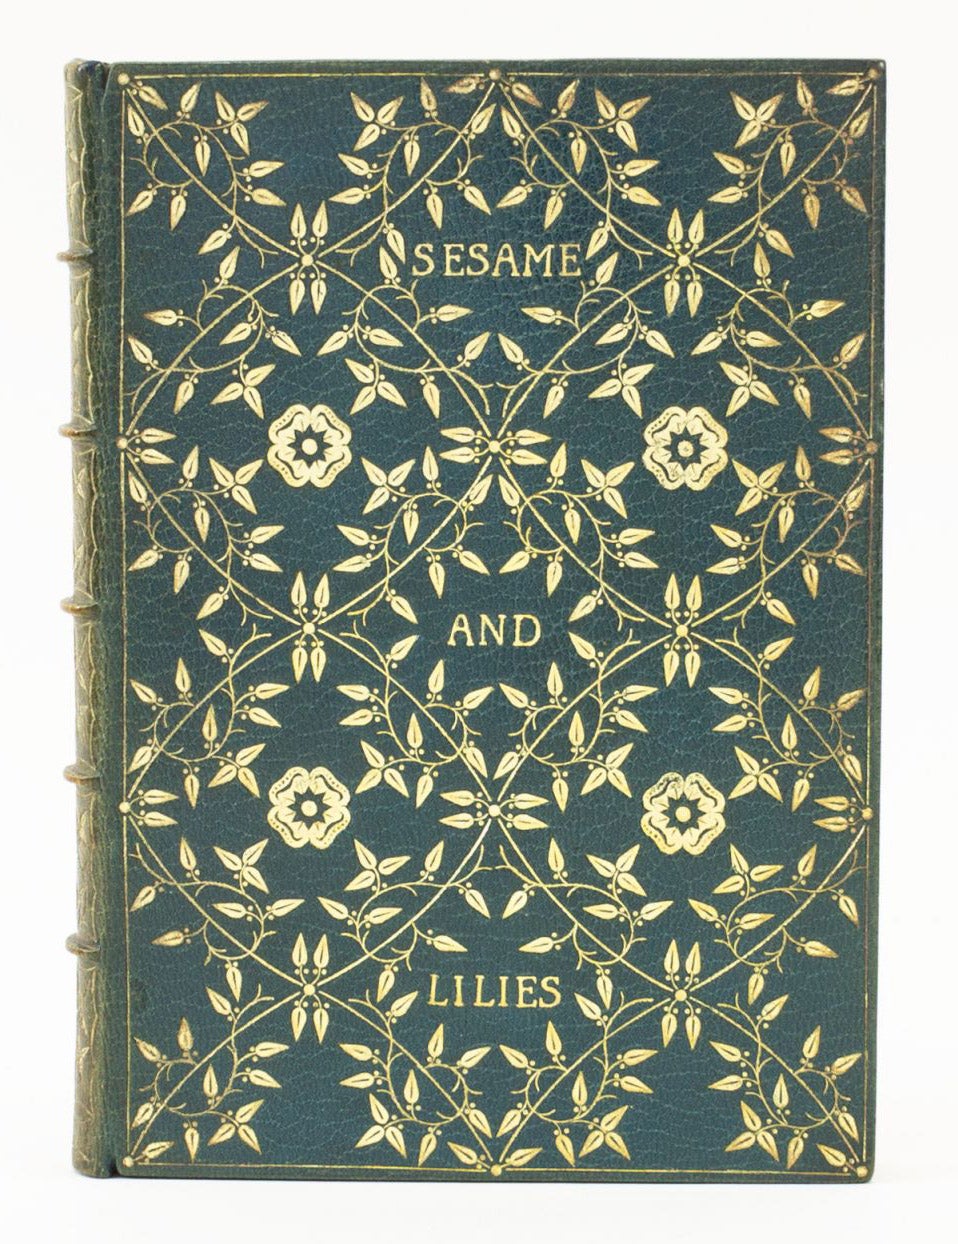 SESAME AND LILIES by BINDINGS - CHARLES ELSDEN GLADSTONE, JOHN RUSKIN on  Phillip J. Pirages Fine Books and Manuscripts